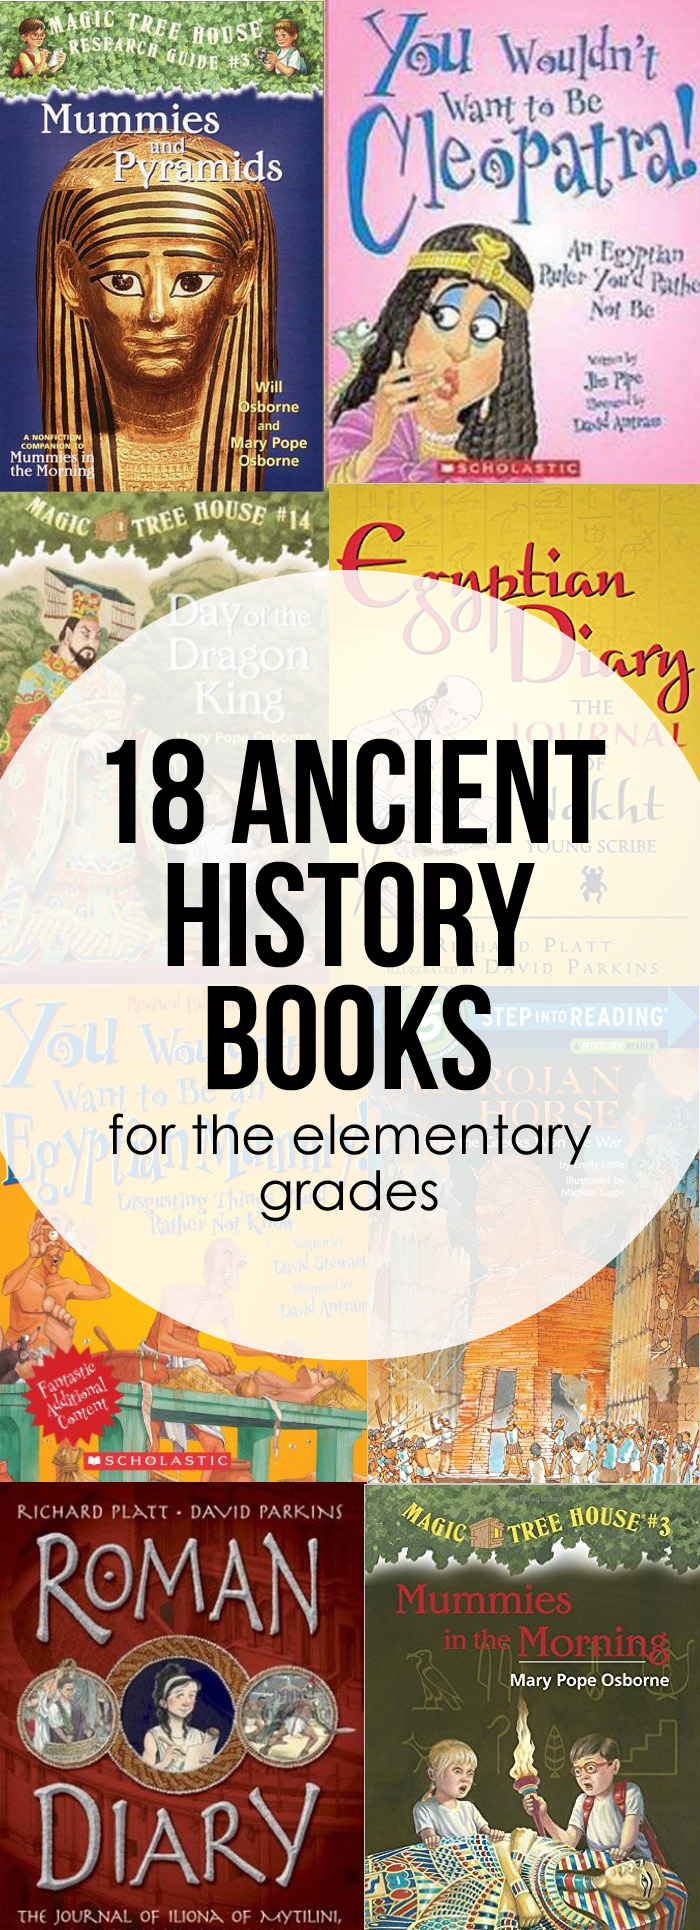 Ancient History Books for Elementary